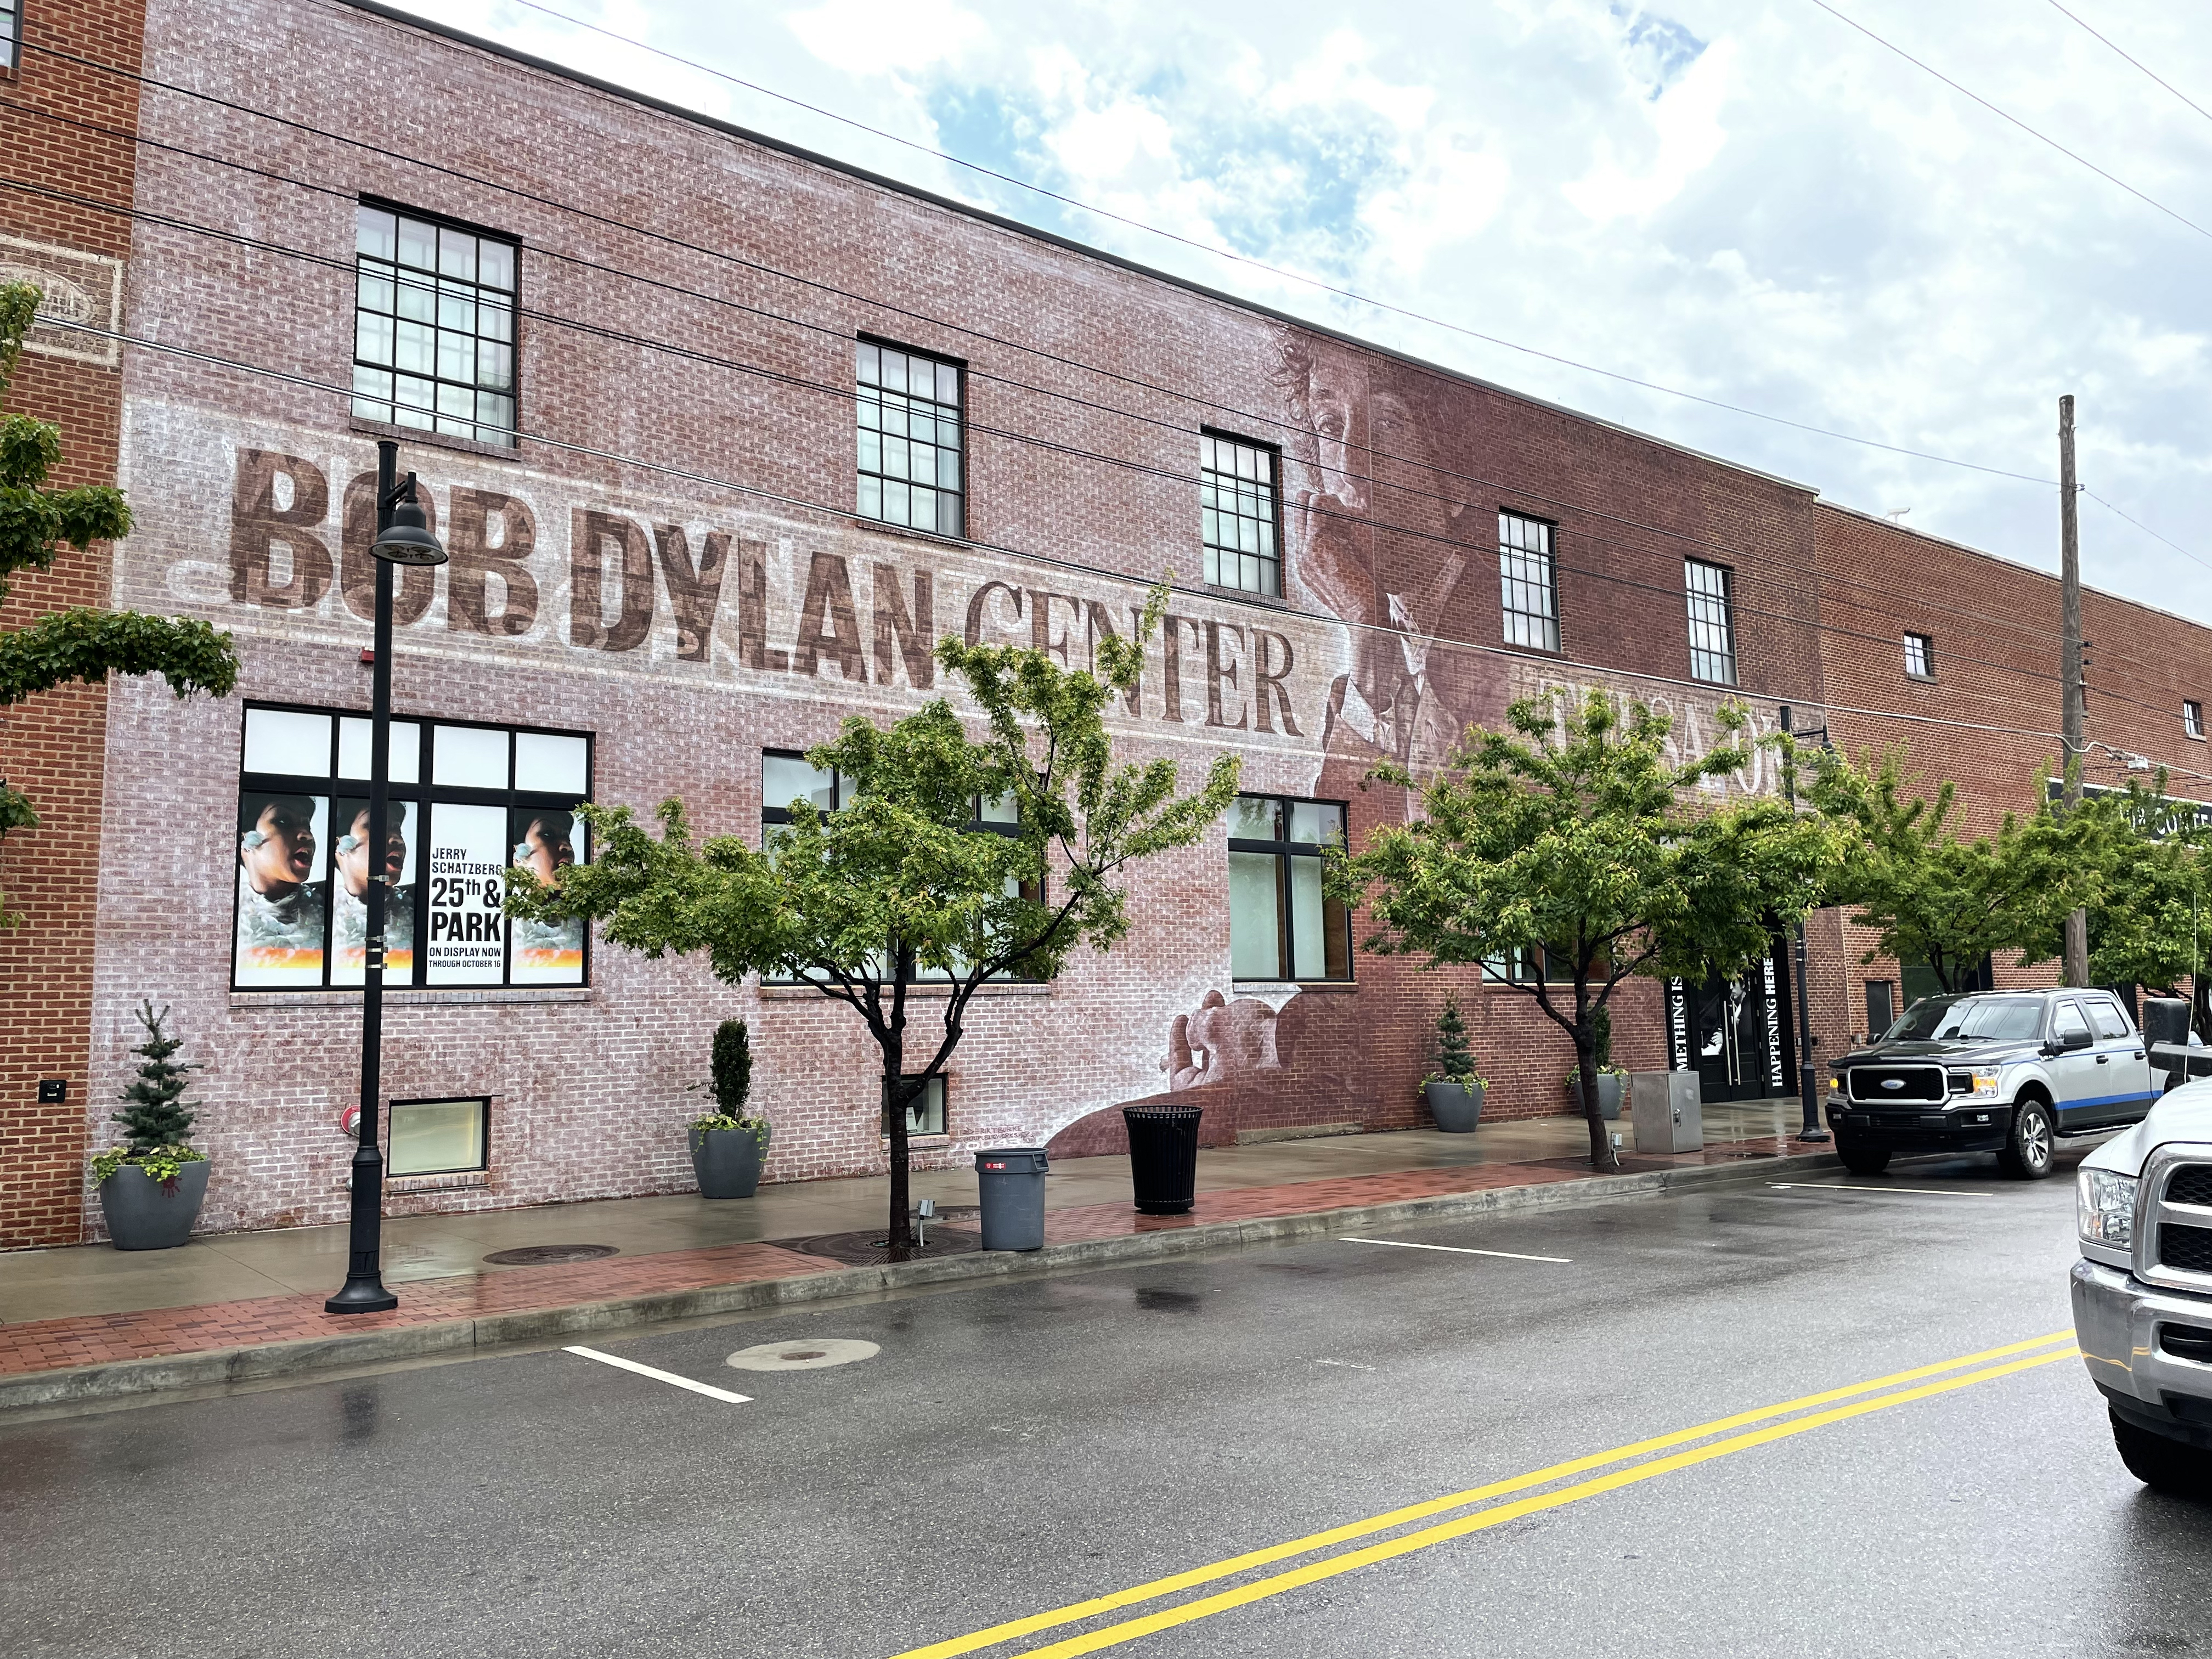 A brick facade, with the words "Bob Dylan Center," is flanked by some green trees